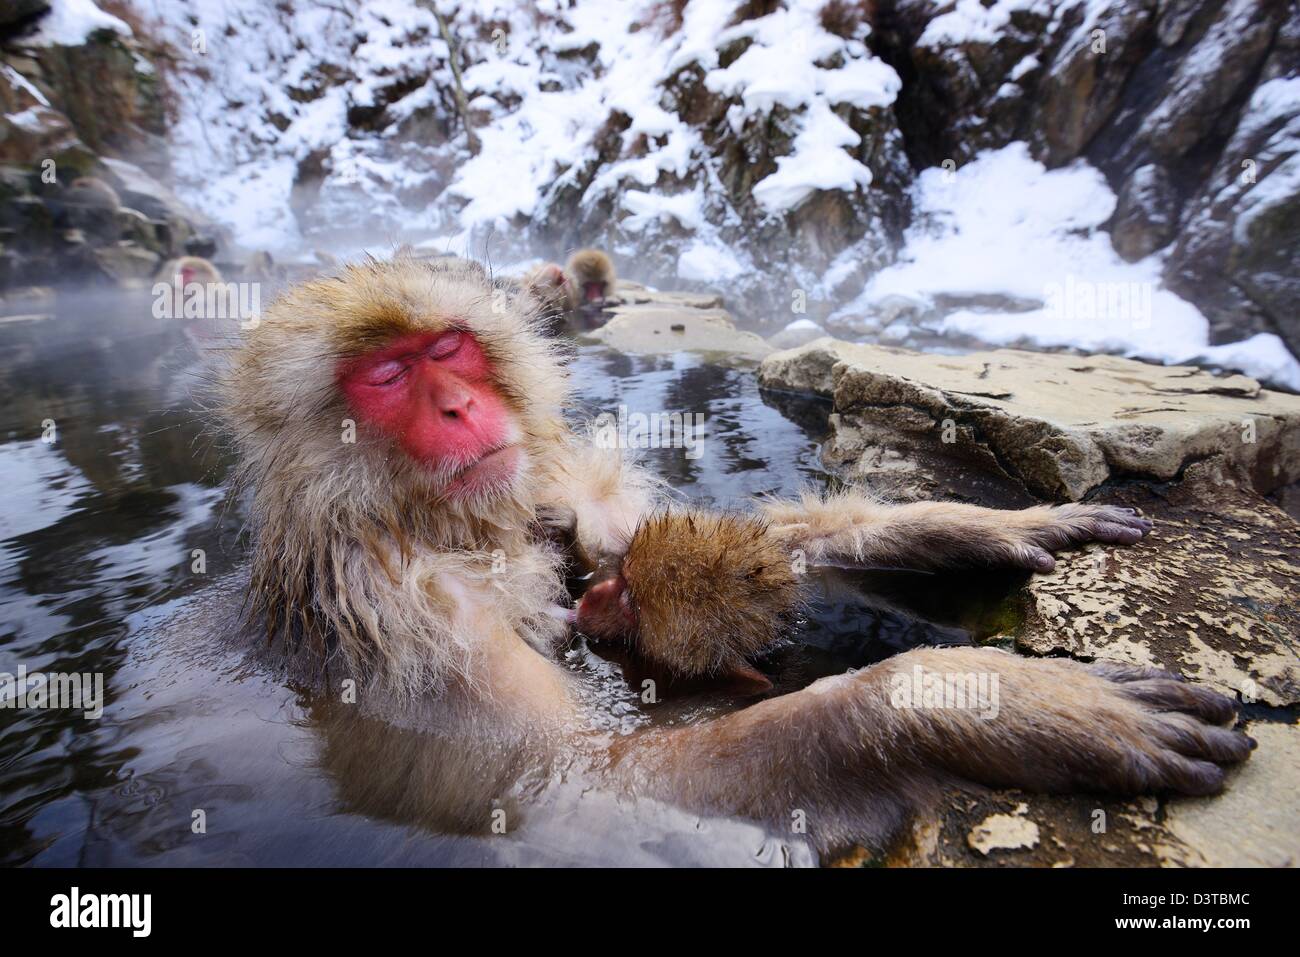 A Japanese Macaque relaxes in the hot spring protecting its young. Stock Photo